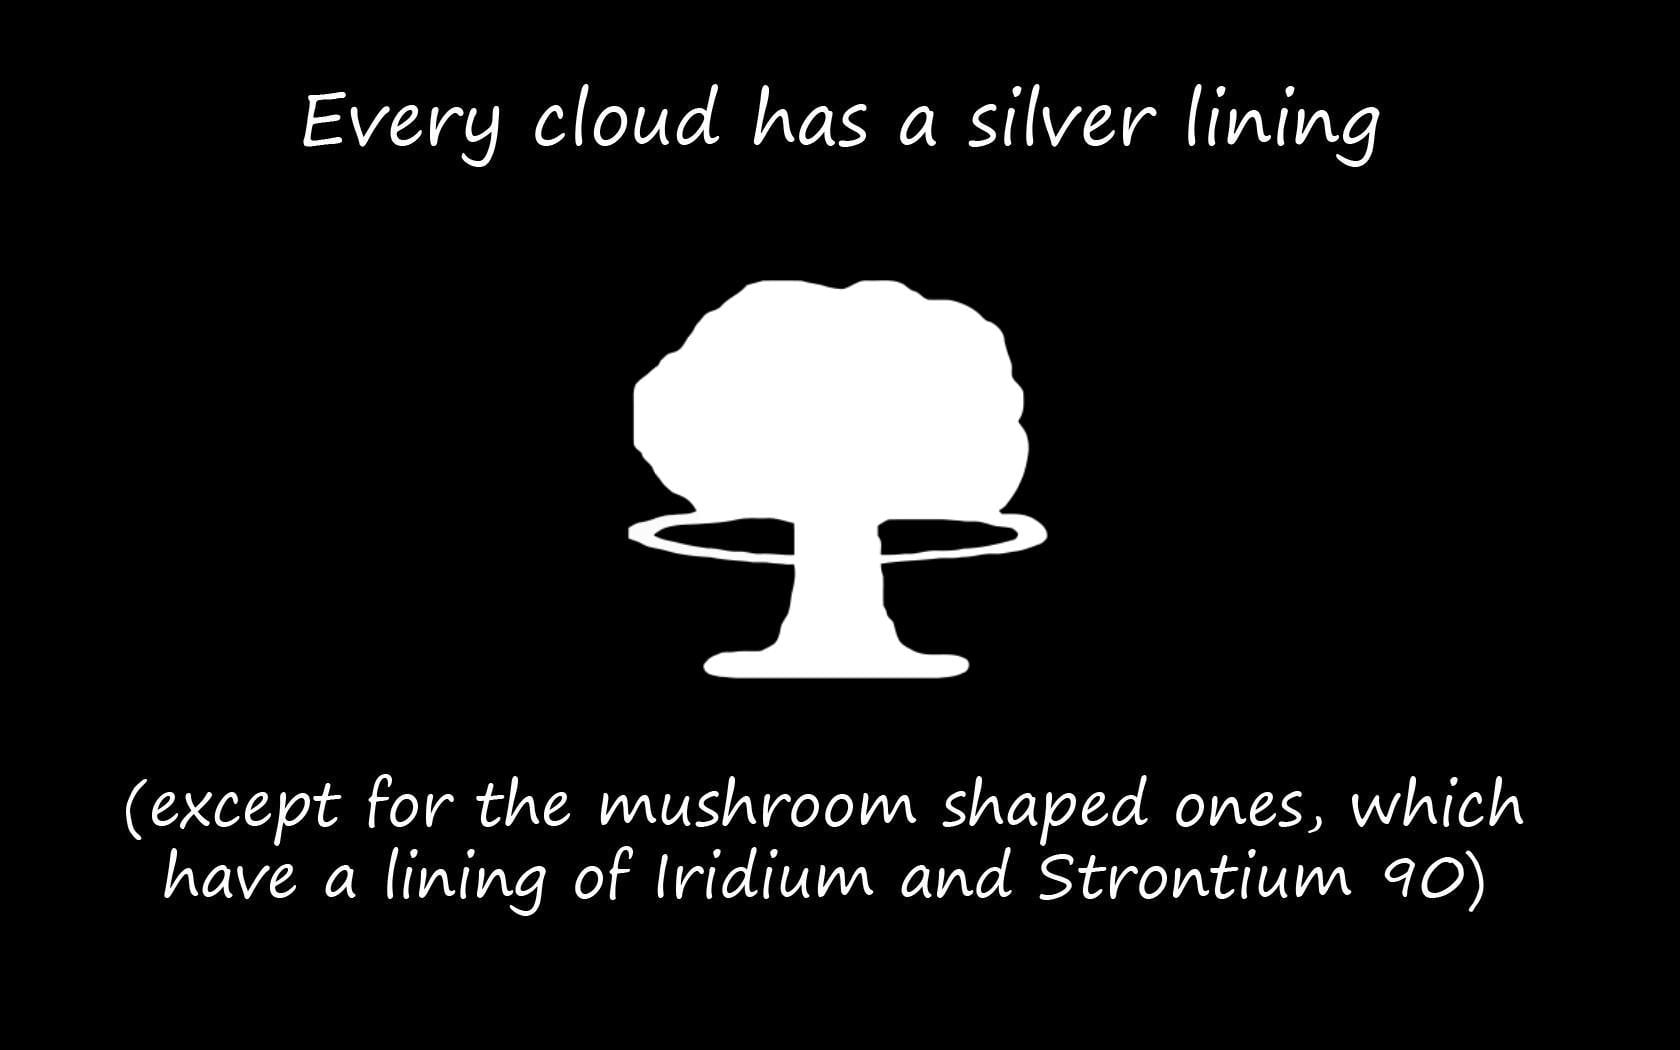 white bomb smoke illustration with every cloud has a silver lining text overlay, humor, minimalism, apocalyptic, dark humor